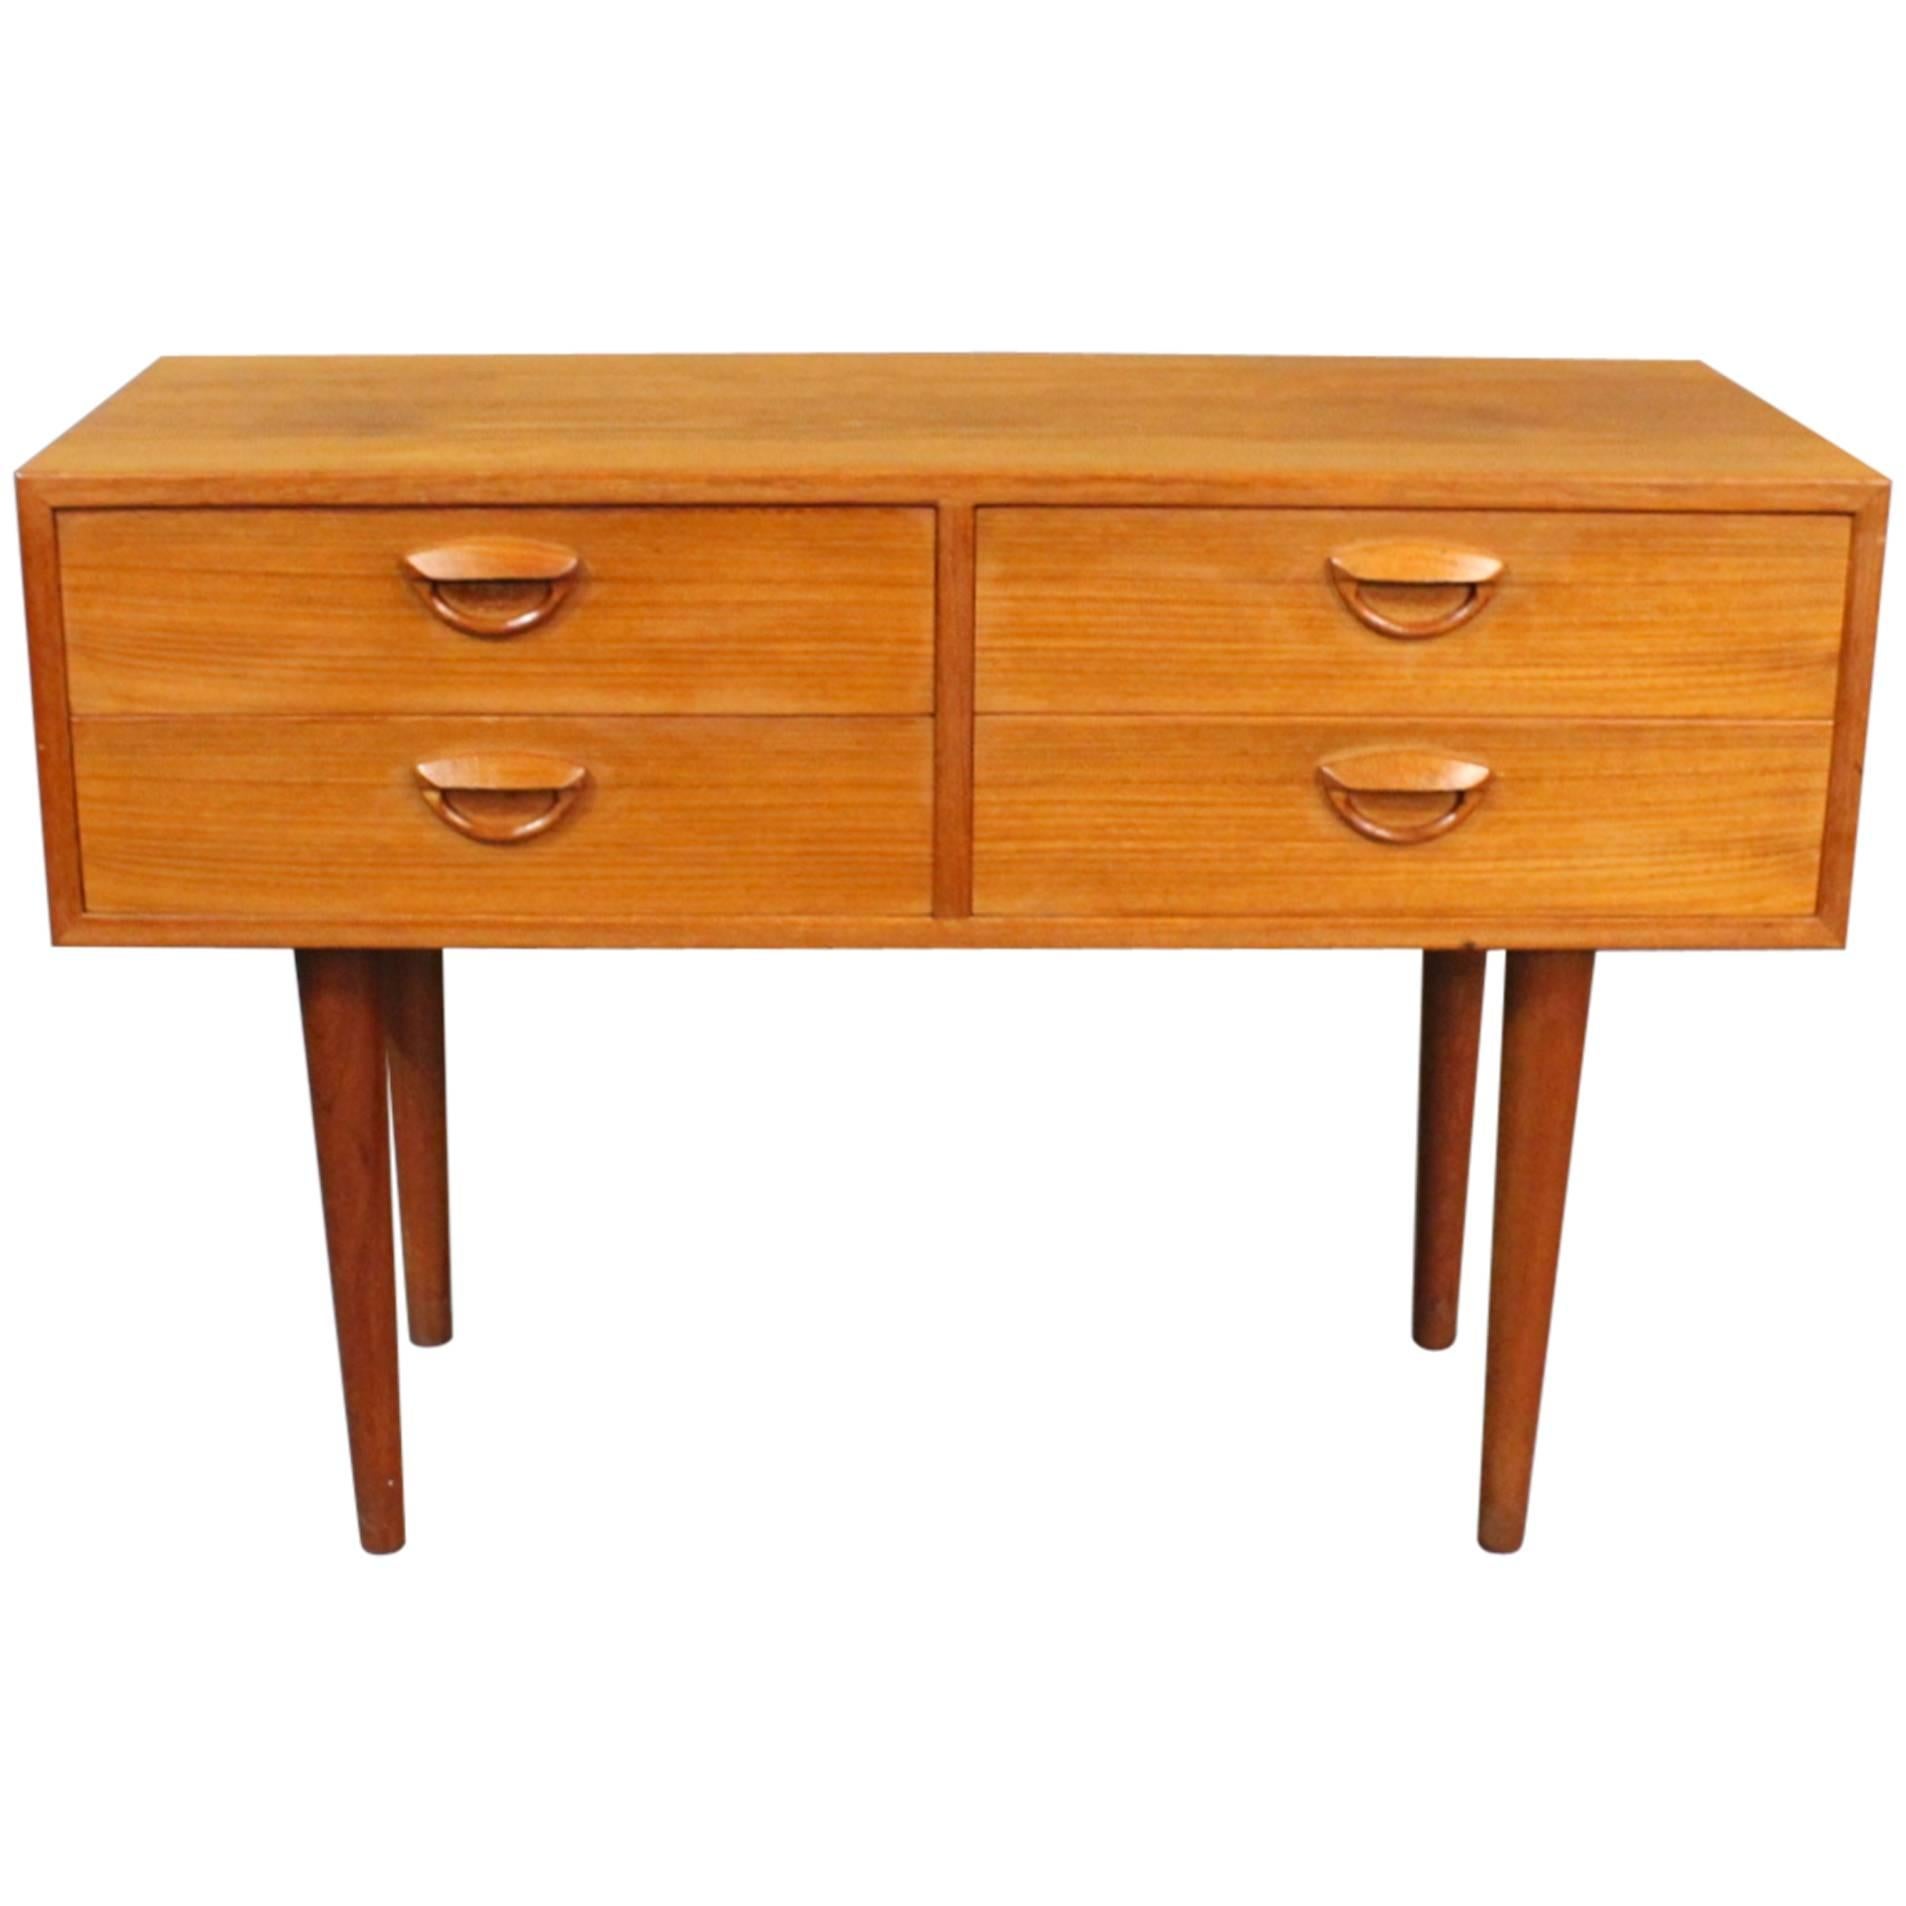 FM Chest of Drawers in Teak with Four Drawers Designed by Kai Kristiansen, 1960